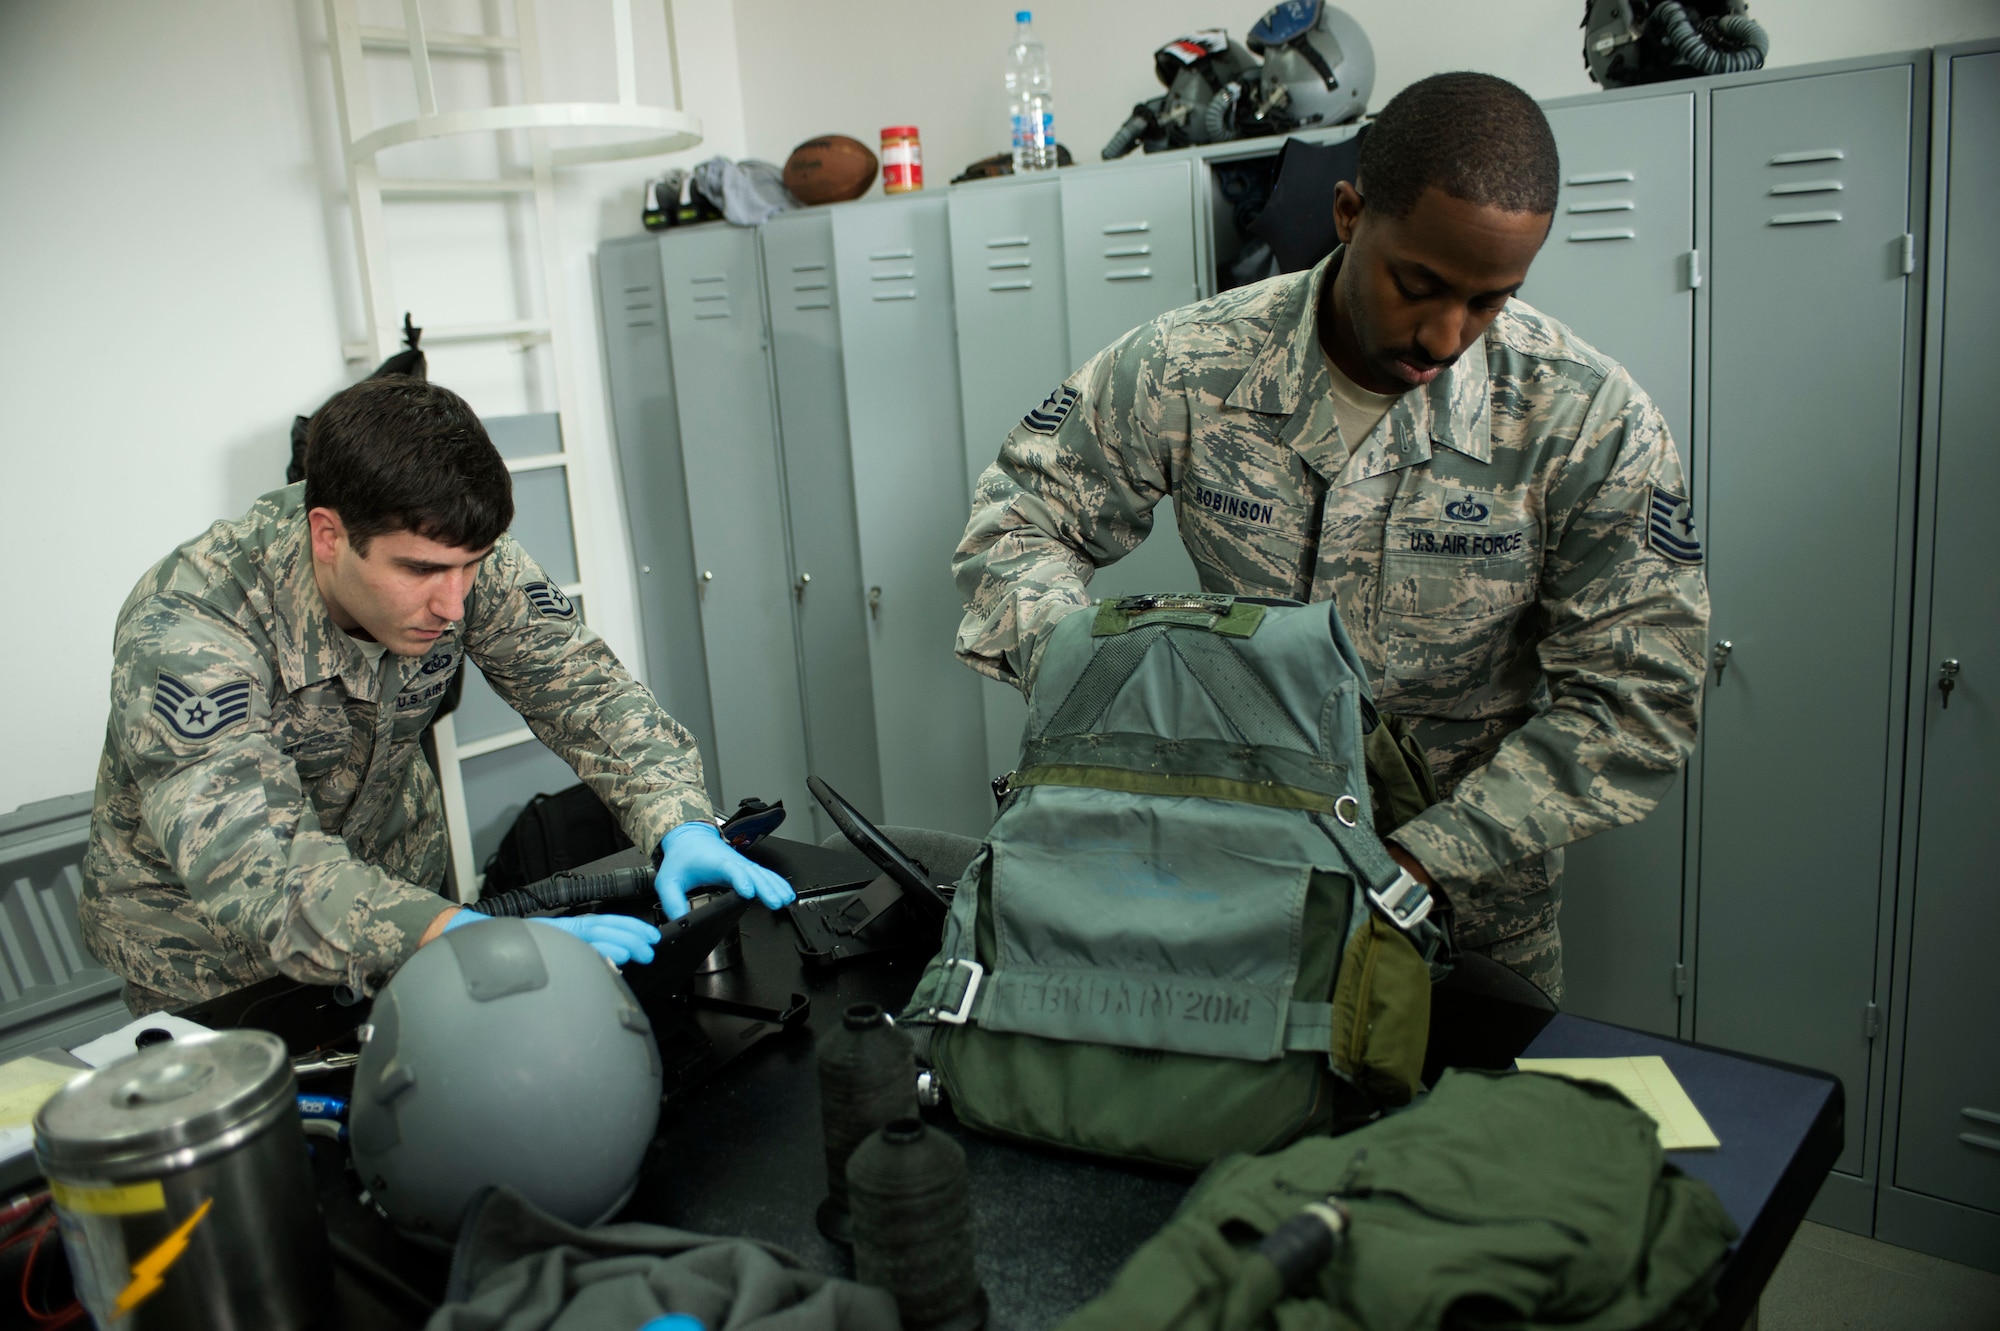 U.S. Air Force Staff Sgt. Kevin Ray, left, and Tech. Sgt. Nathanial Robinson Jr., right, both 74th Expeditionary Fighter Squadron aircrew flight equipment technicians from the 23rd Operations Support Squadron at Moody Air Force Base, Ga., check survival equipment during the 74th EFS’s deployment in support of Operation Atlantic Resolve at Graf Ignatievo, Bulgaria, March 16, 2016. Aircrew flight equipment technicians inspect and repair all gear issued before and after every flight. (U.S. Air Force photo by Staff Sgt. Joe W. McFadden/Released)